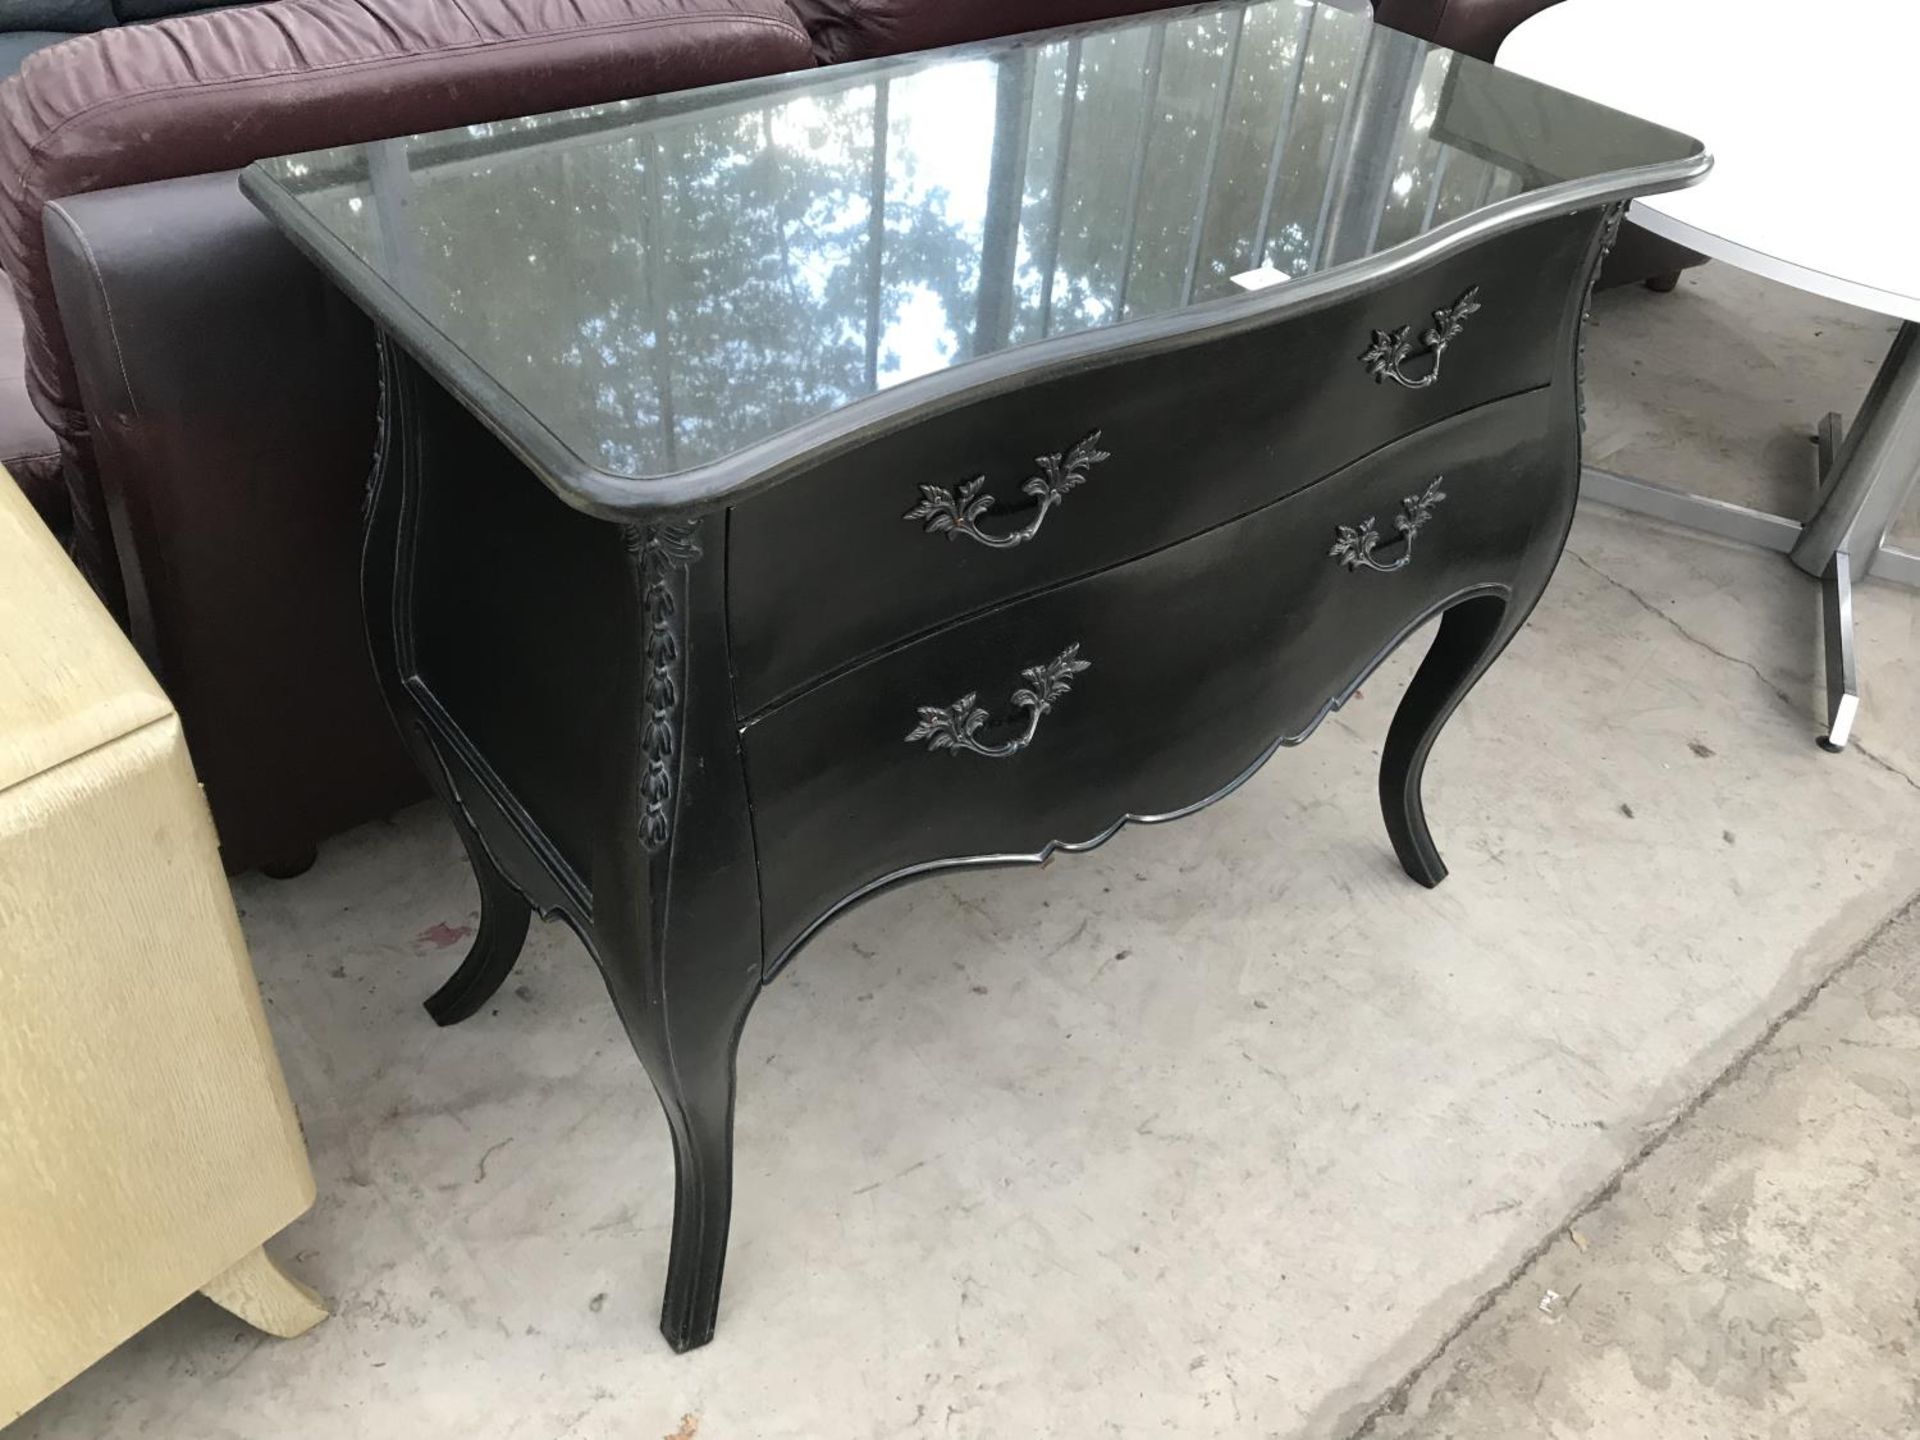 A BLACK ORNATE CHEST OF DRAWERS WITH TWO LONG DRAWERS